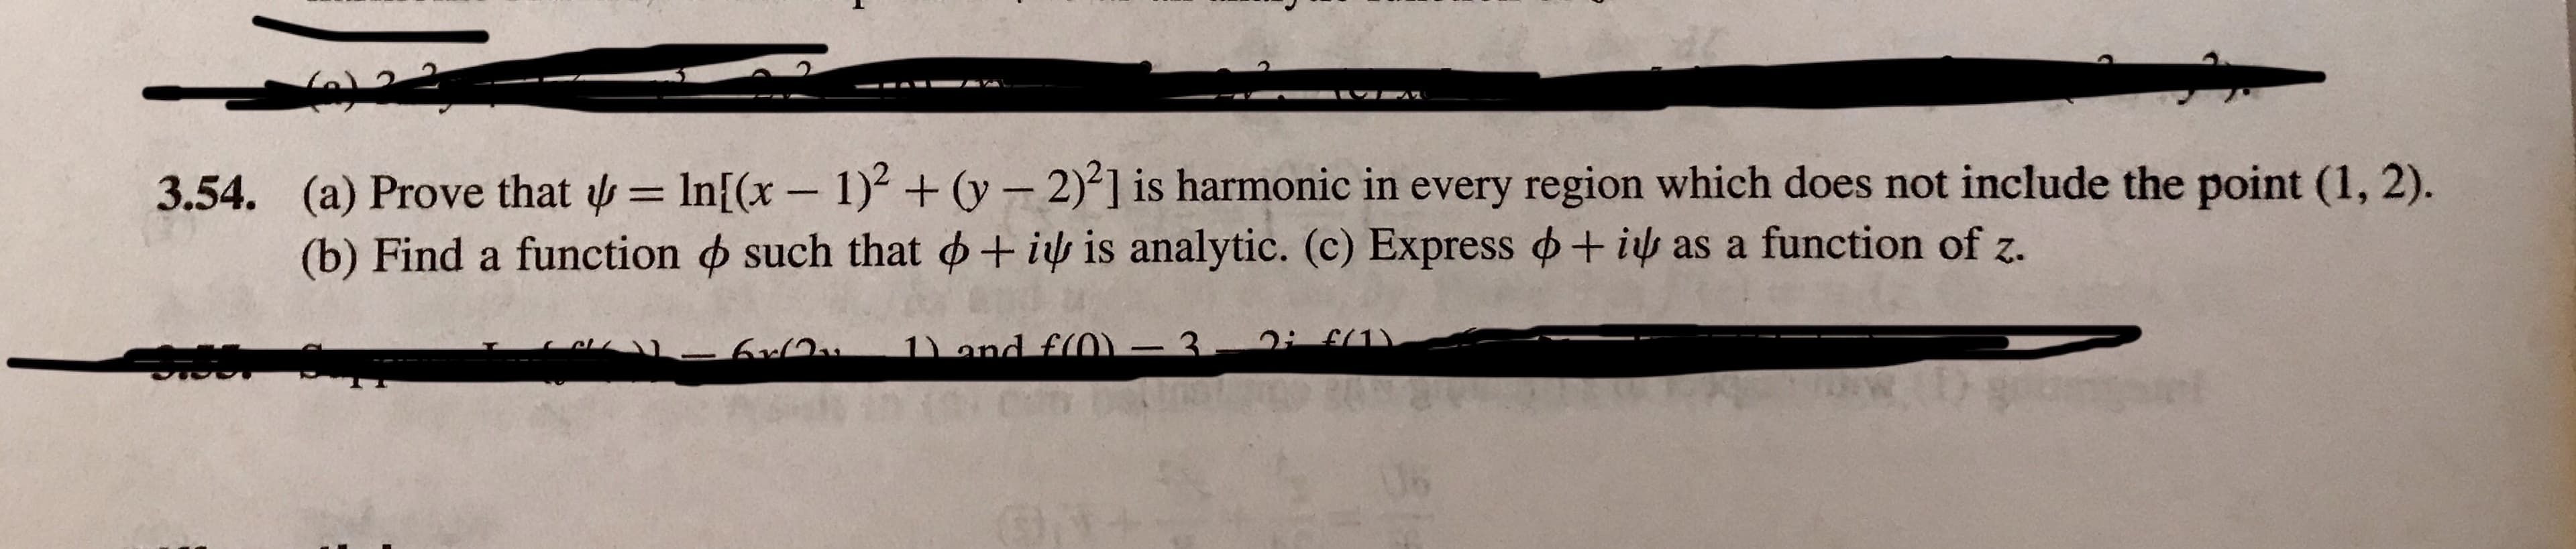 1 )2 + ơ-2)2] is harmonic in every region which does not include the point (1,2).
(a) Prove that ψ = Inf(x-
(b) Find a function ф such that ф + ir is analytic. (c) Express ф+
3.54.
as a function of z.
